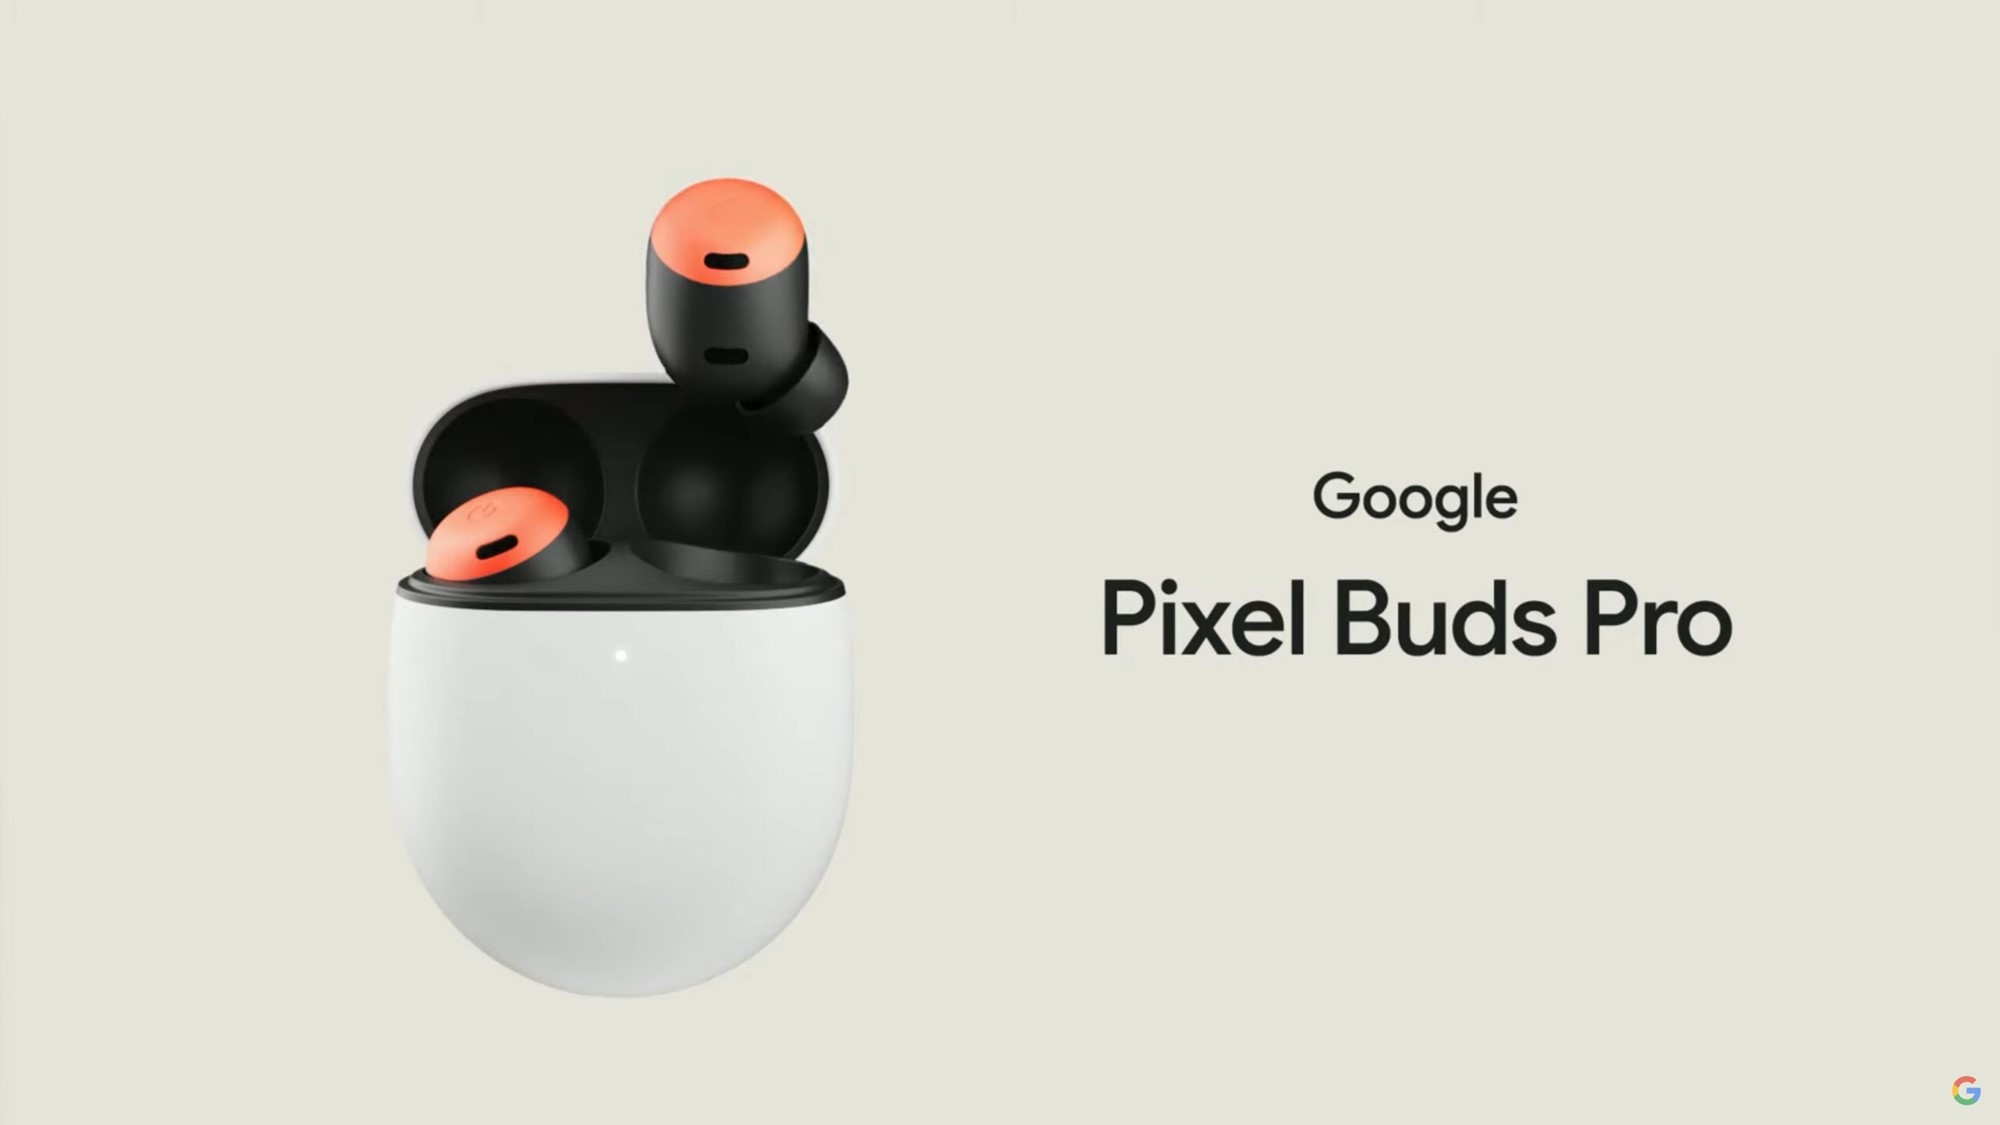 google pixel buds pro brings smart audio switching feature